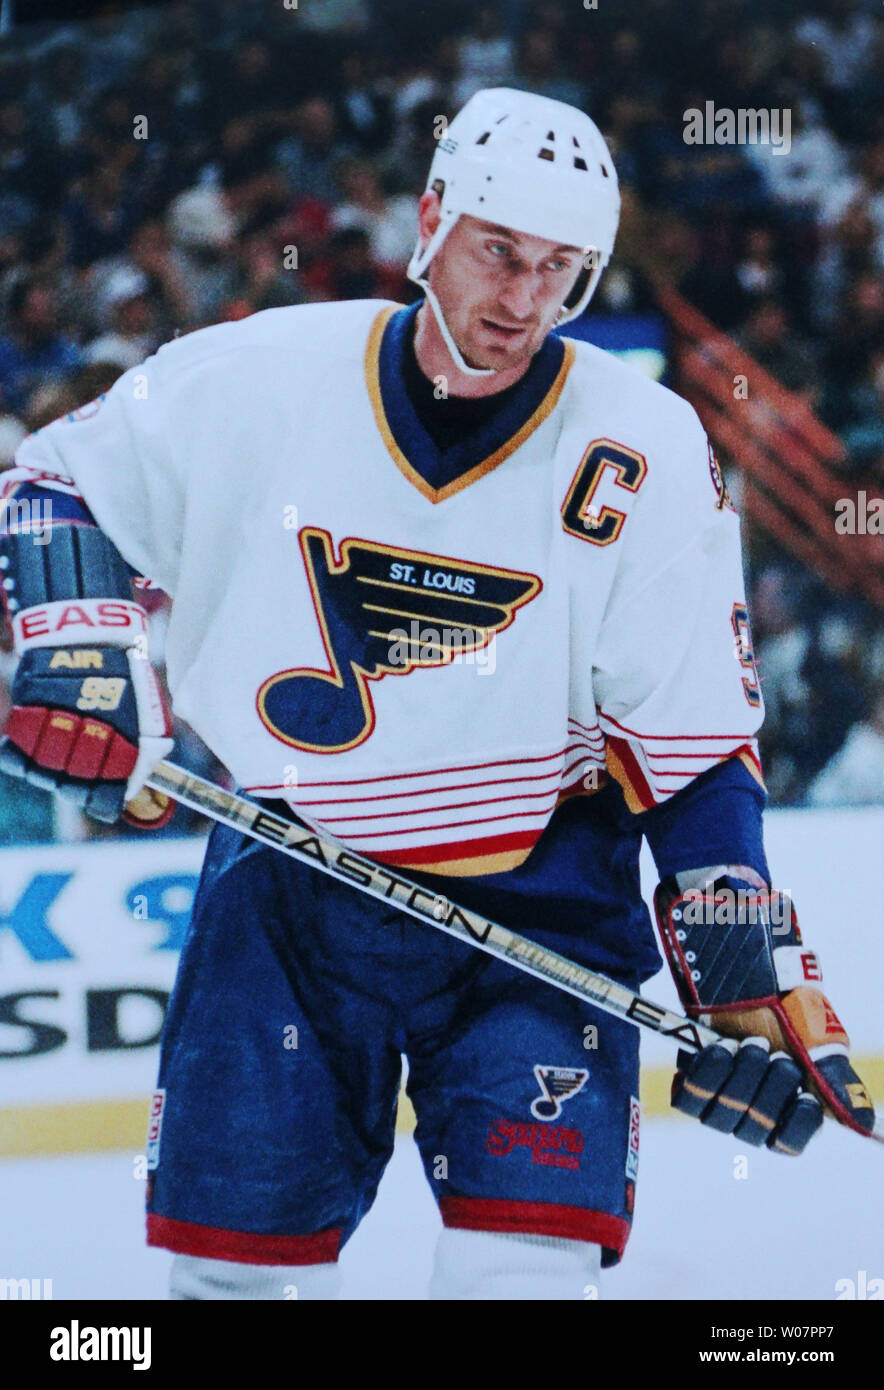 Former St. Louis Blues captain Wayne Gretzky takes to the ice in his first  home game as a member of the St. Louis Blues against Florida on March 5,  1996 at the